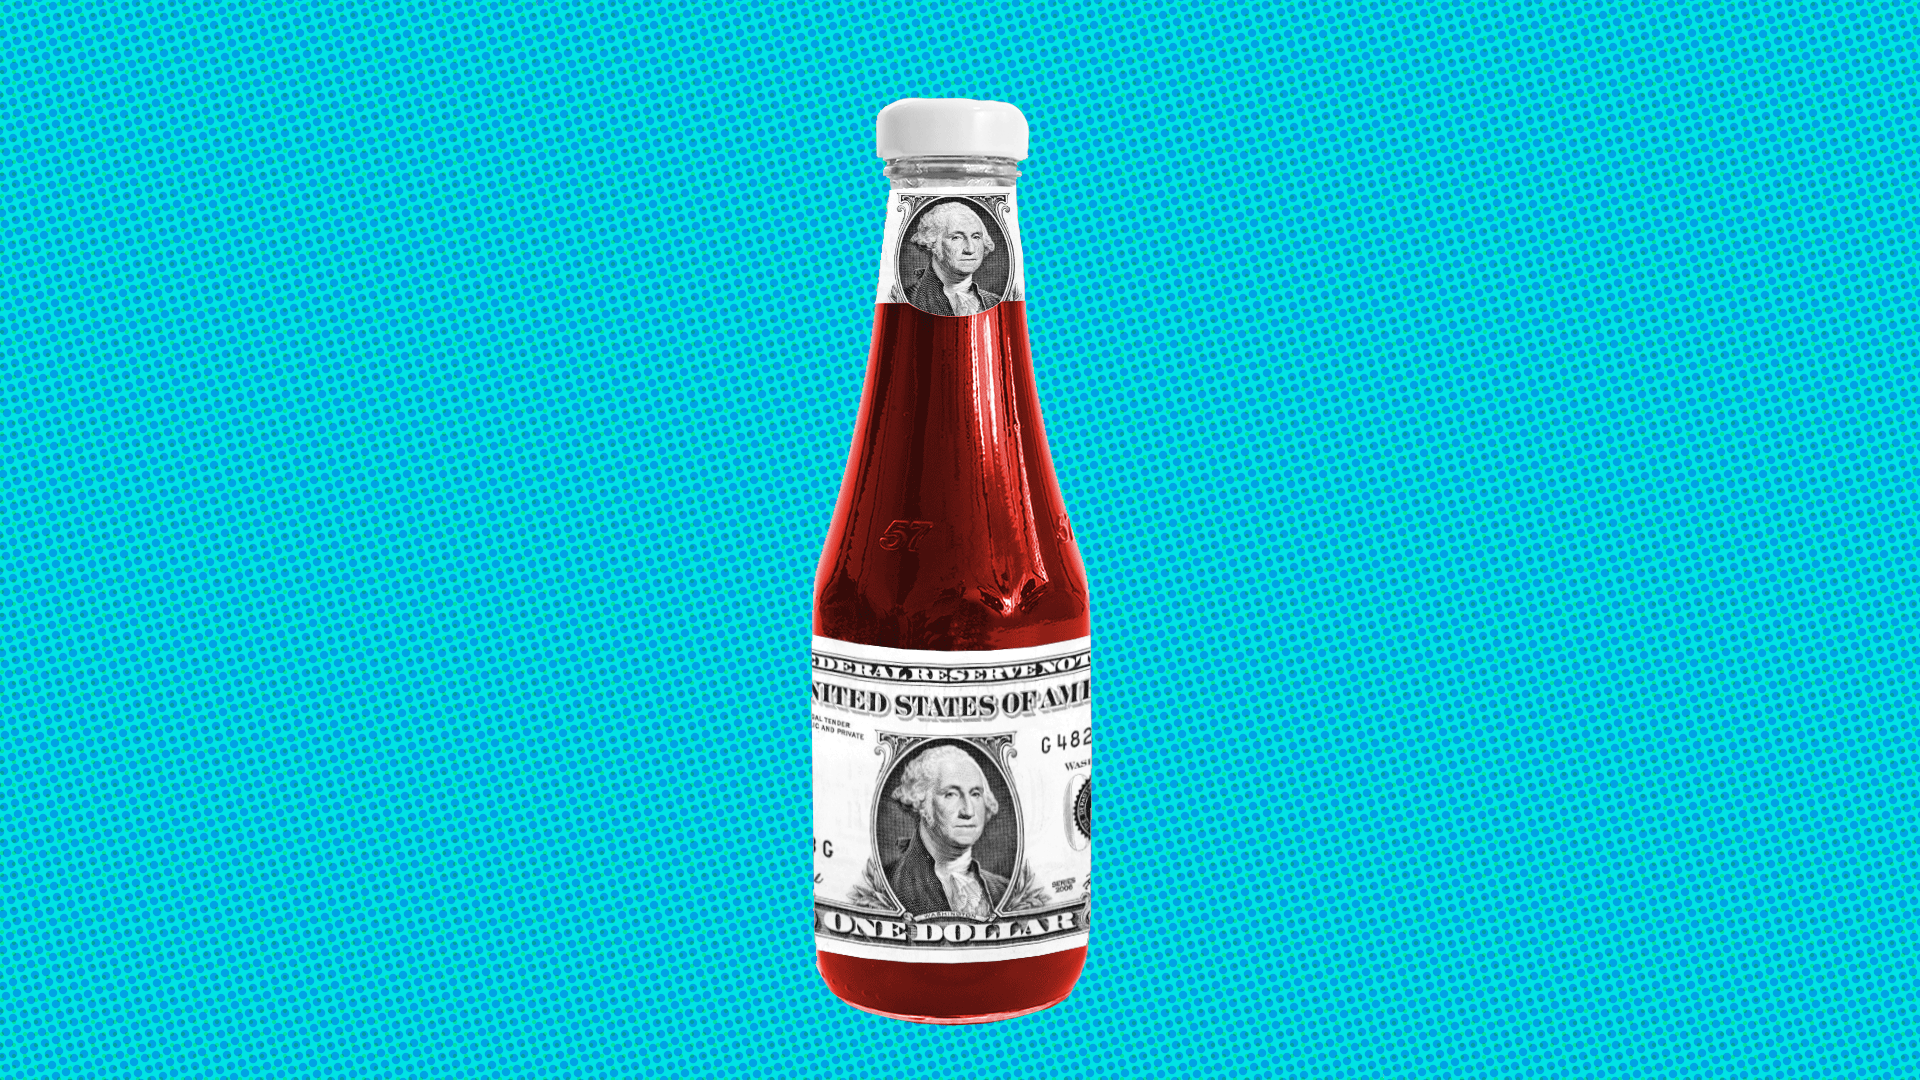 Illustration of a ketchup bottle with a dollar bill as the label.